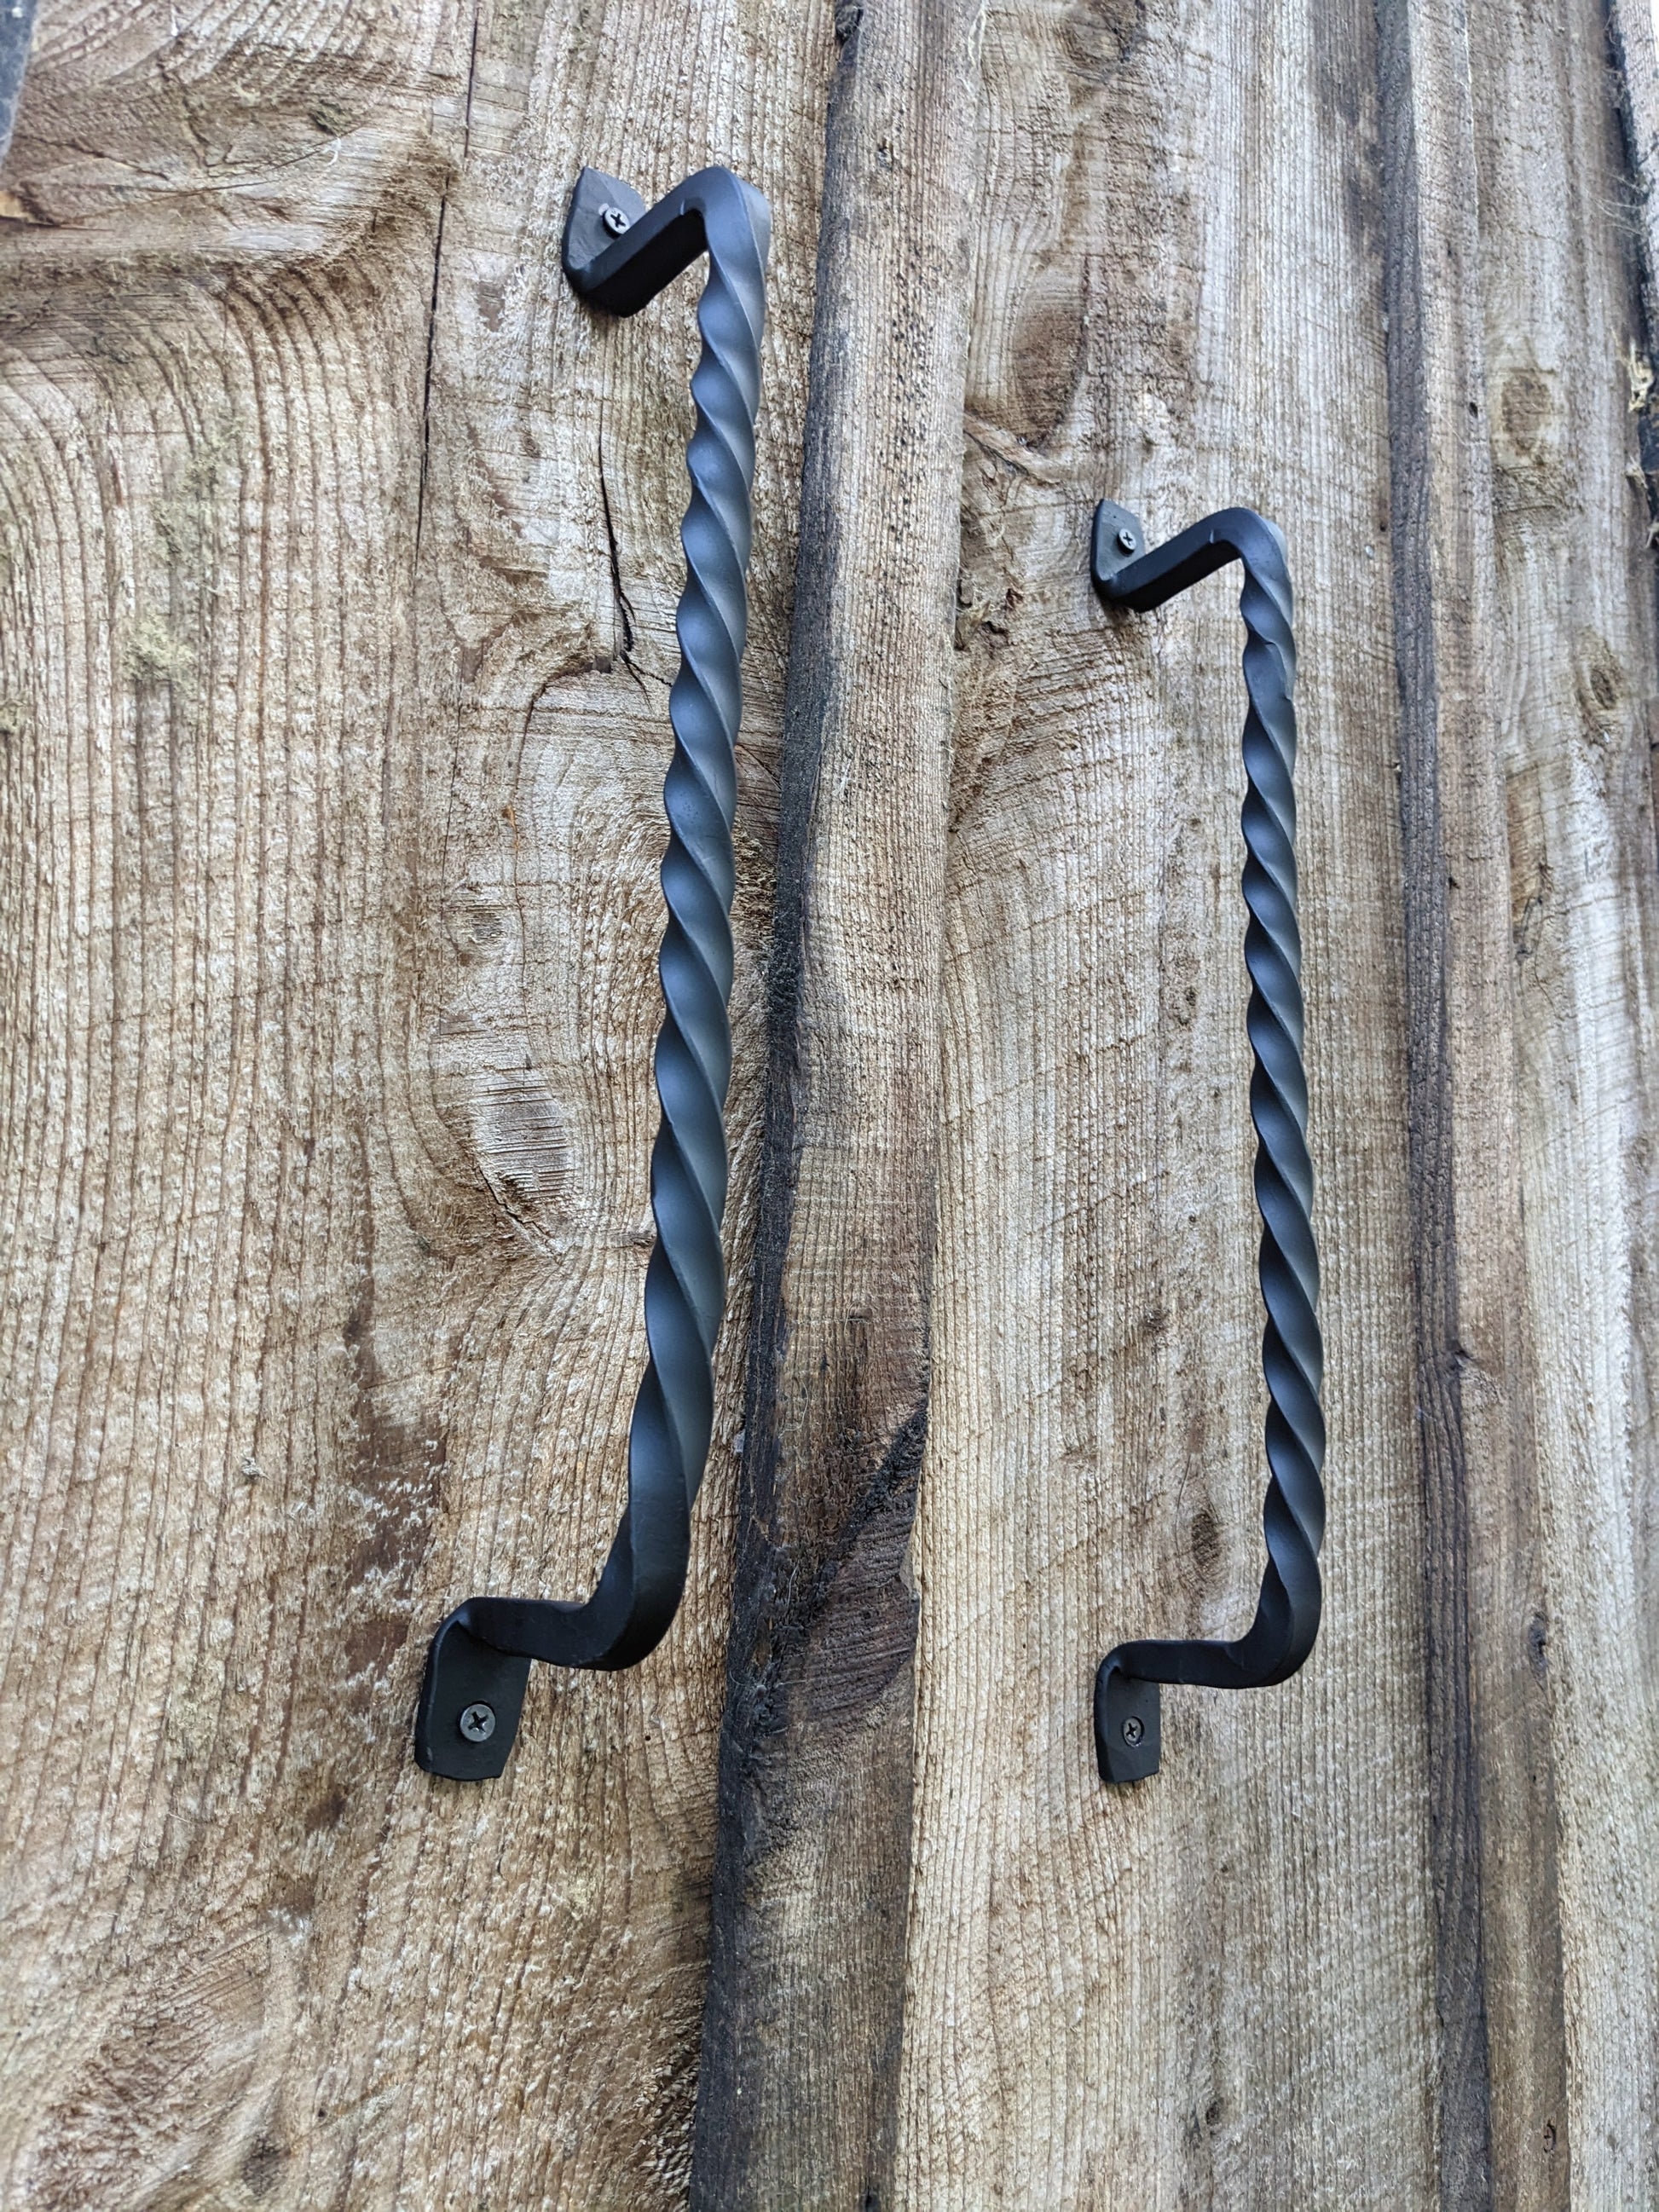 Two hand forged handles, each made of a solid piece of steel hand twisted by a real blacksmith. the view is from underneath looking up and shows the black handles mounted to barn wood doors.